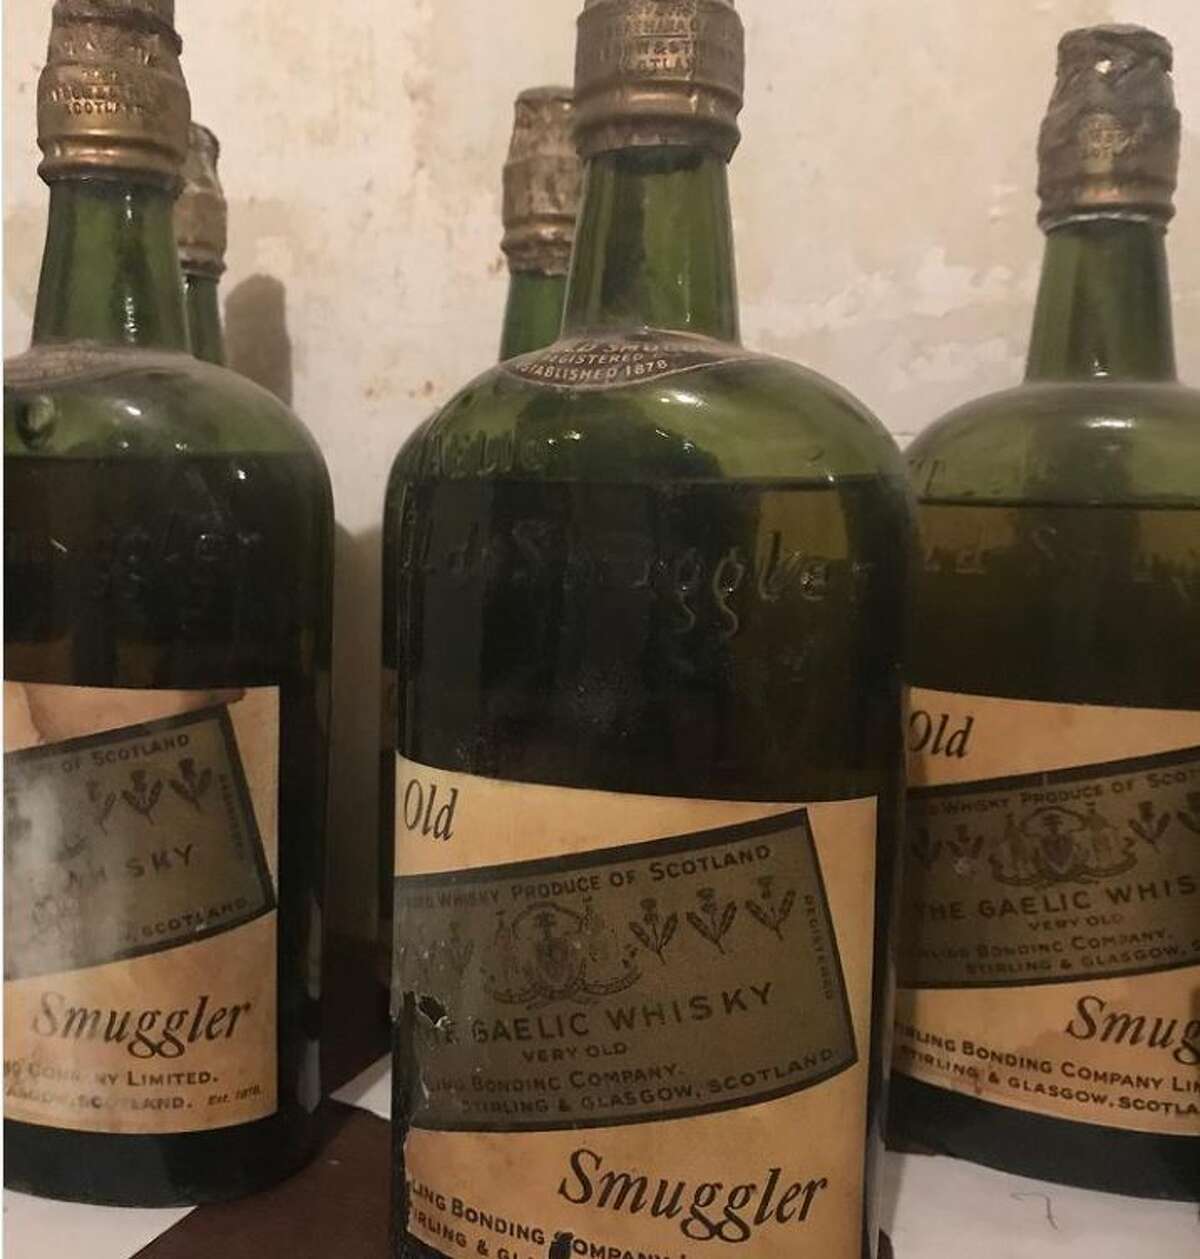 Nick Drummond and Patrick Bakker bought a fixer-upper in Ames, N.Y. and found 88 bottles of Prohibition-era whisky in the walls and under the floorboards.